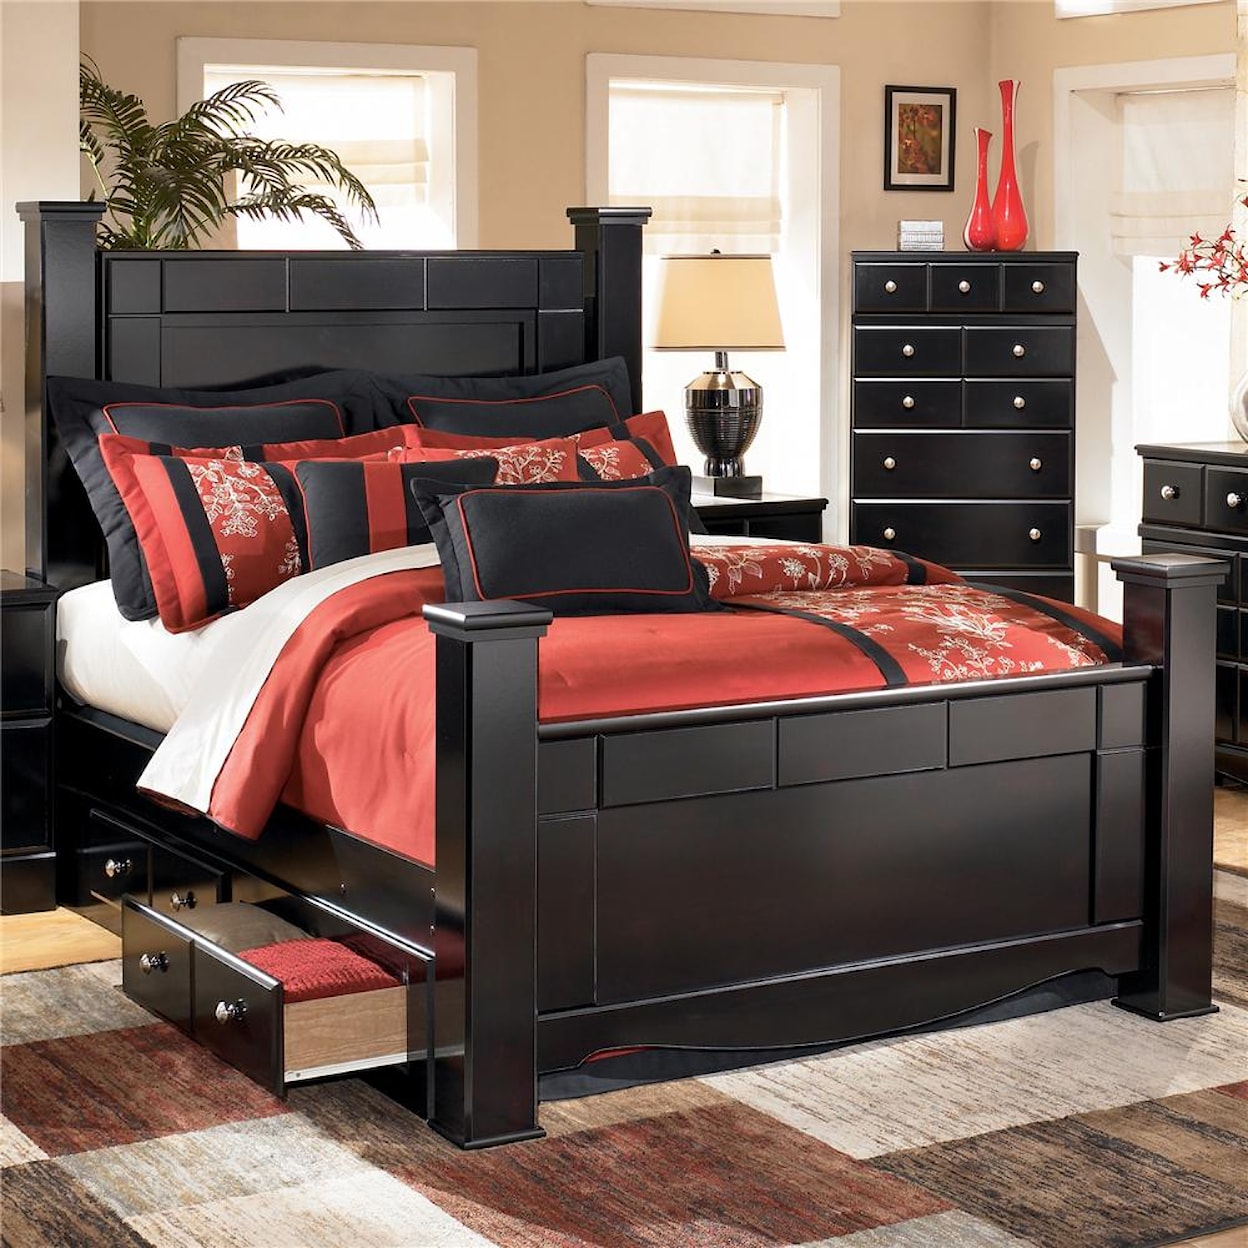 Ashley Furniture Signature Design Shay B271 Queen Poster Bed with Underbed Storage